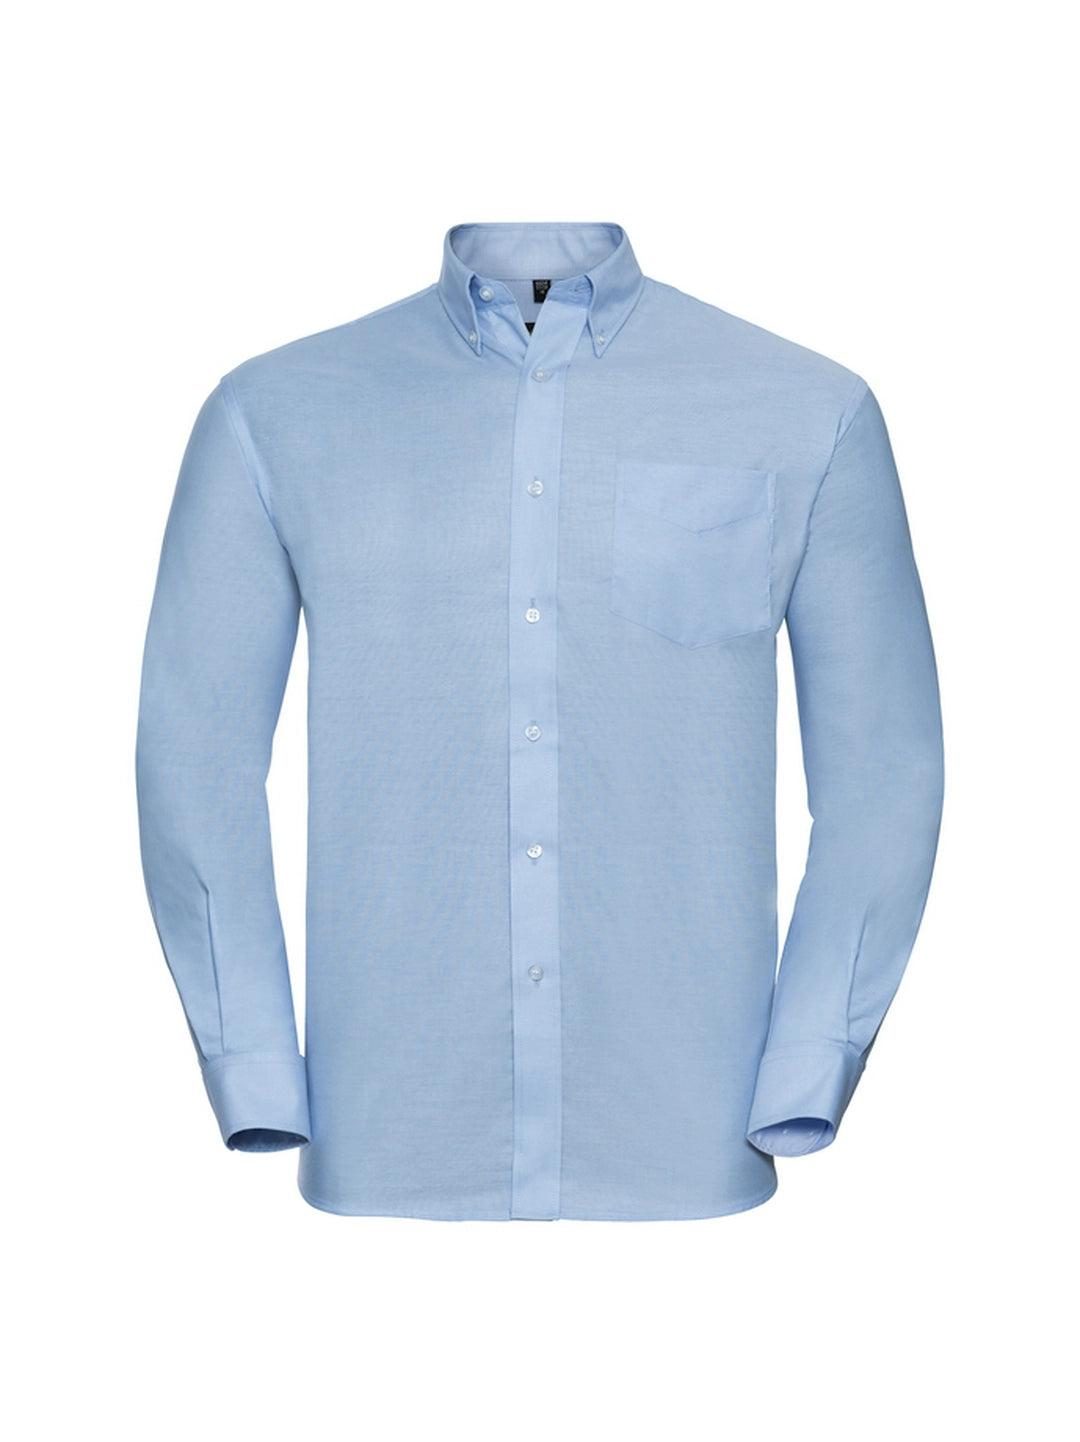 Russell Collection 932M Mens Oxford Long Sleeve Shirt - COOZO